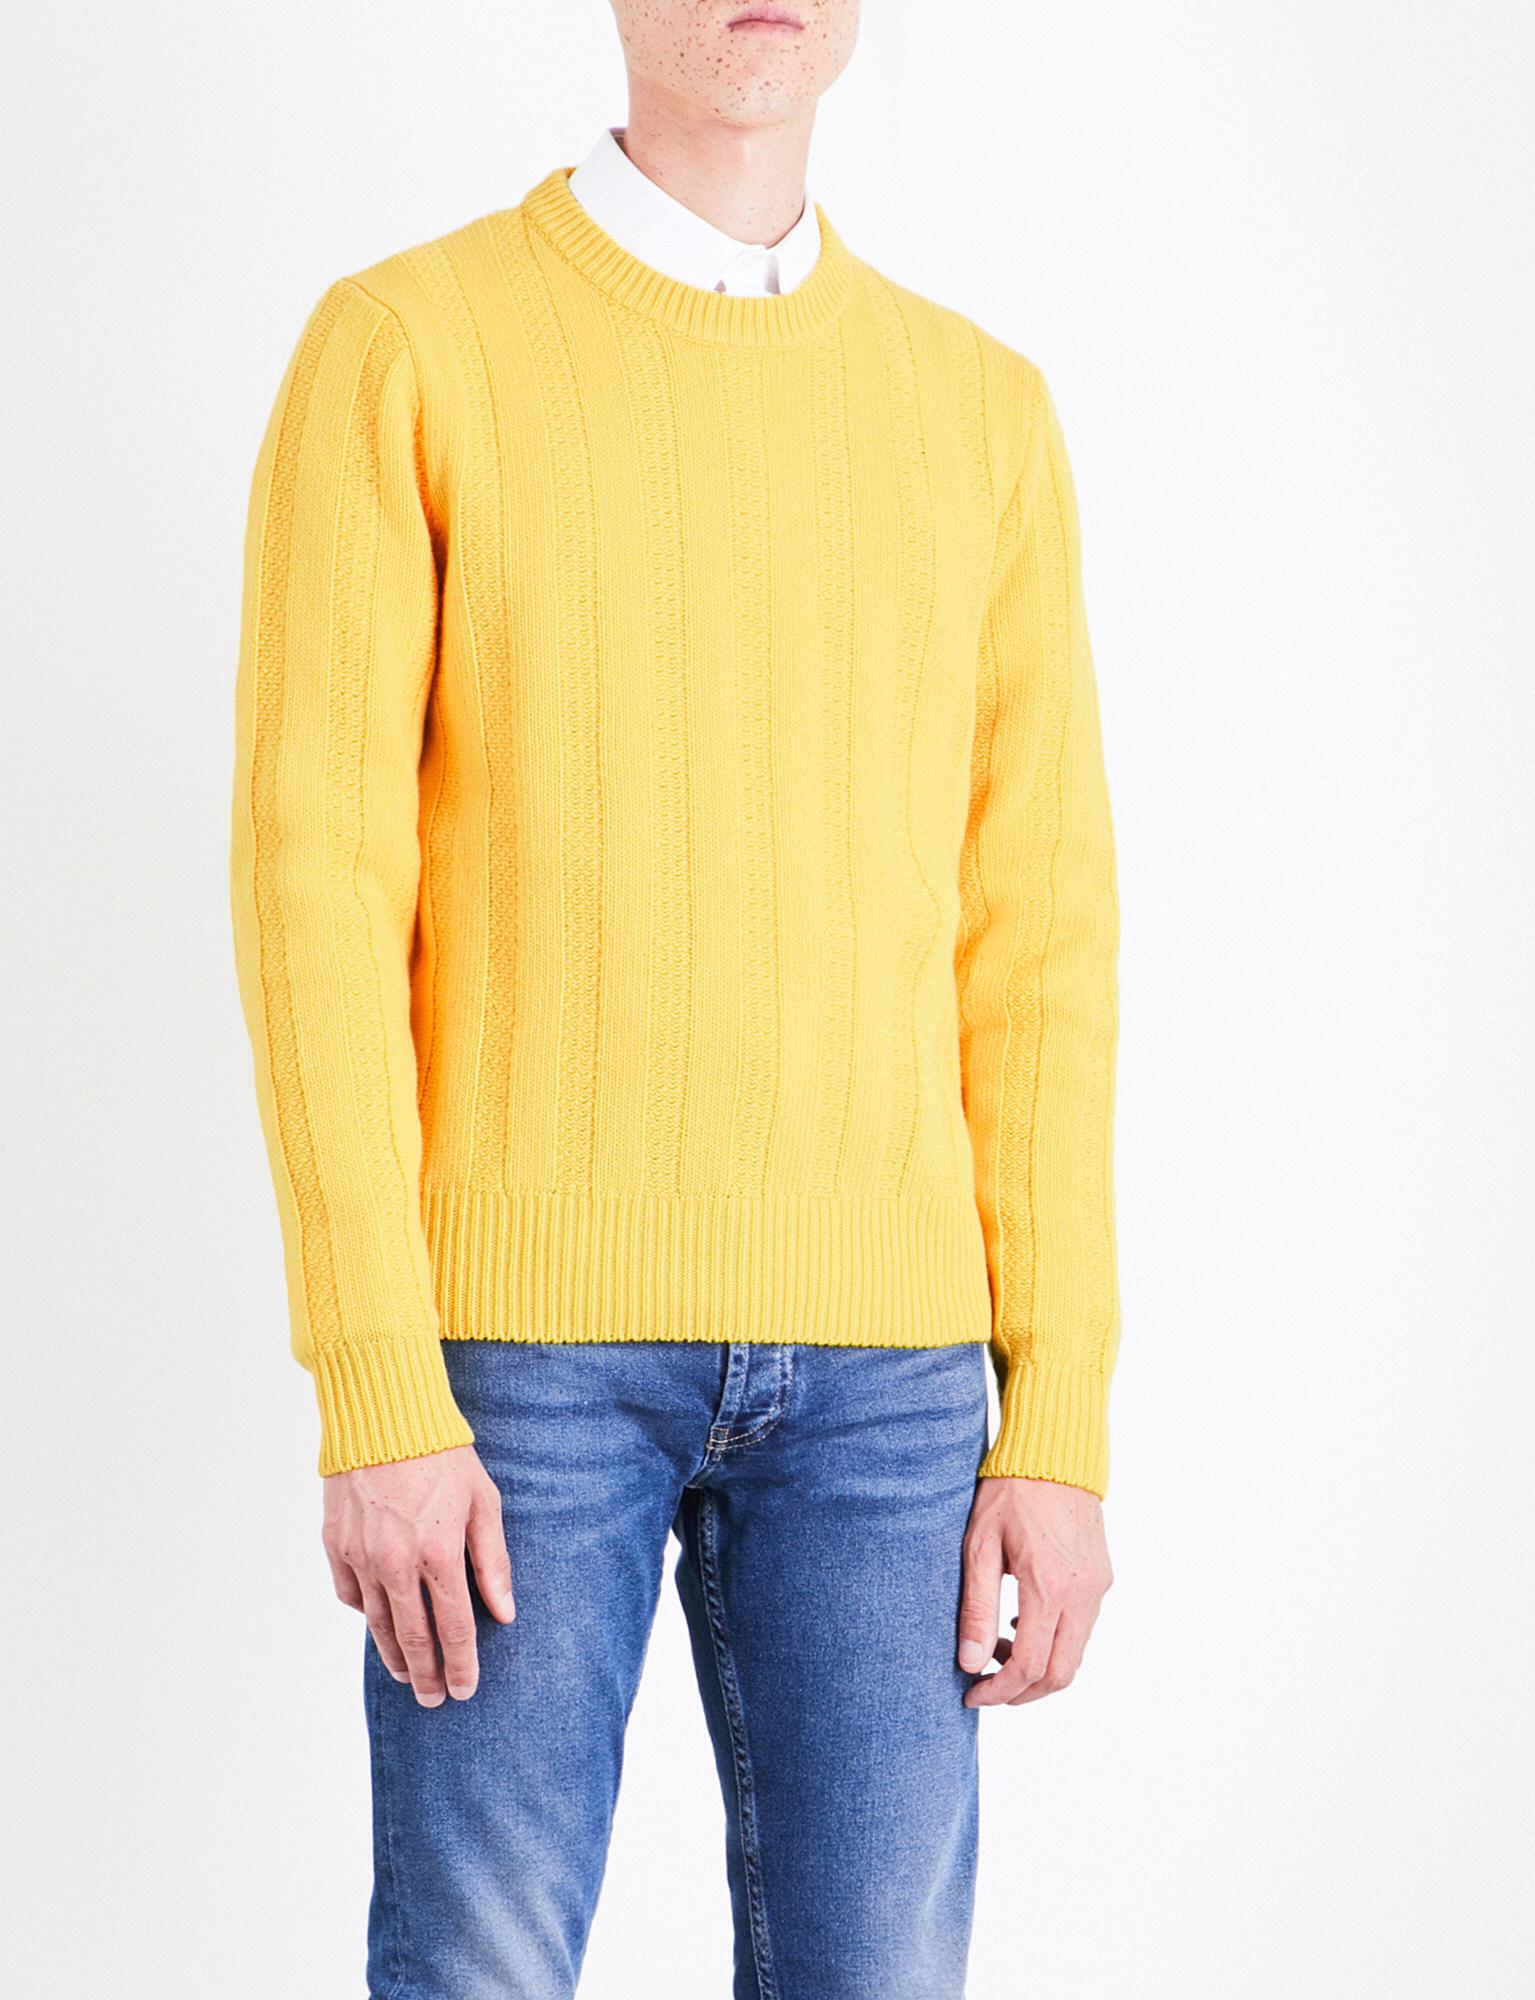 Sandro Drop-shoulder Ribbed Wool Jumper in Yellow for Men - Lyst